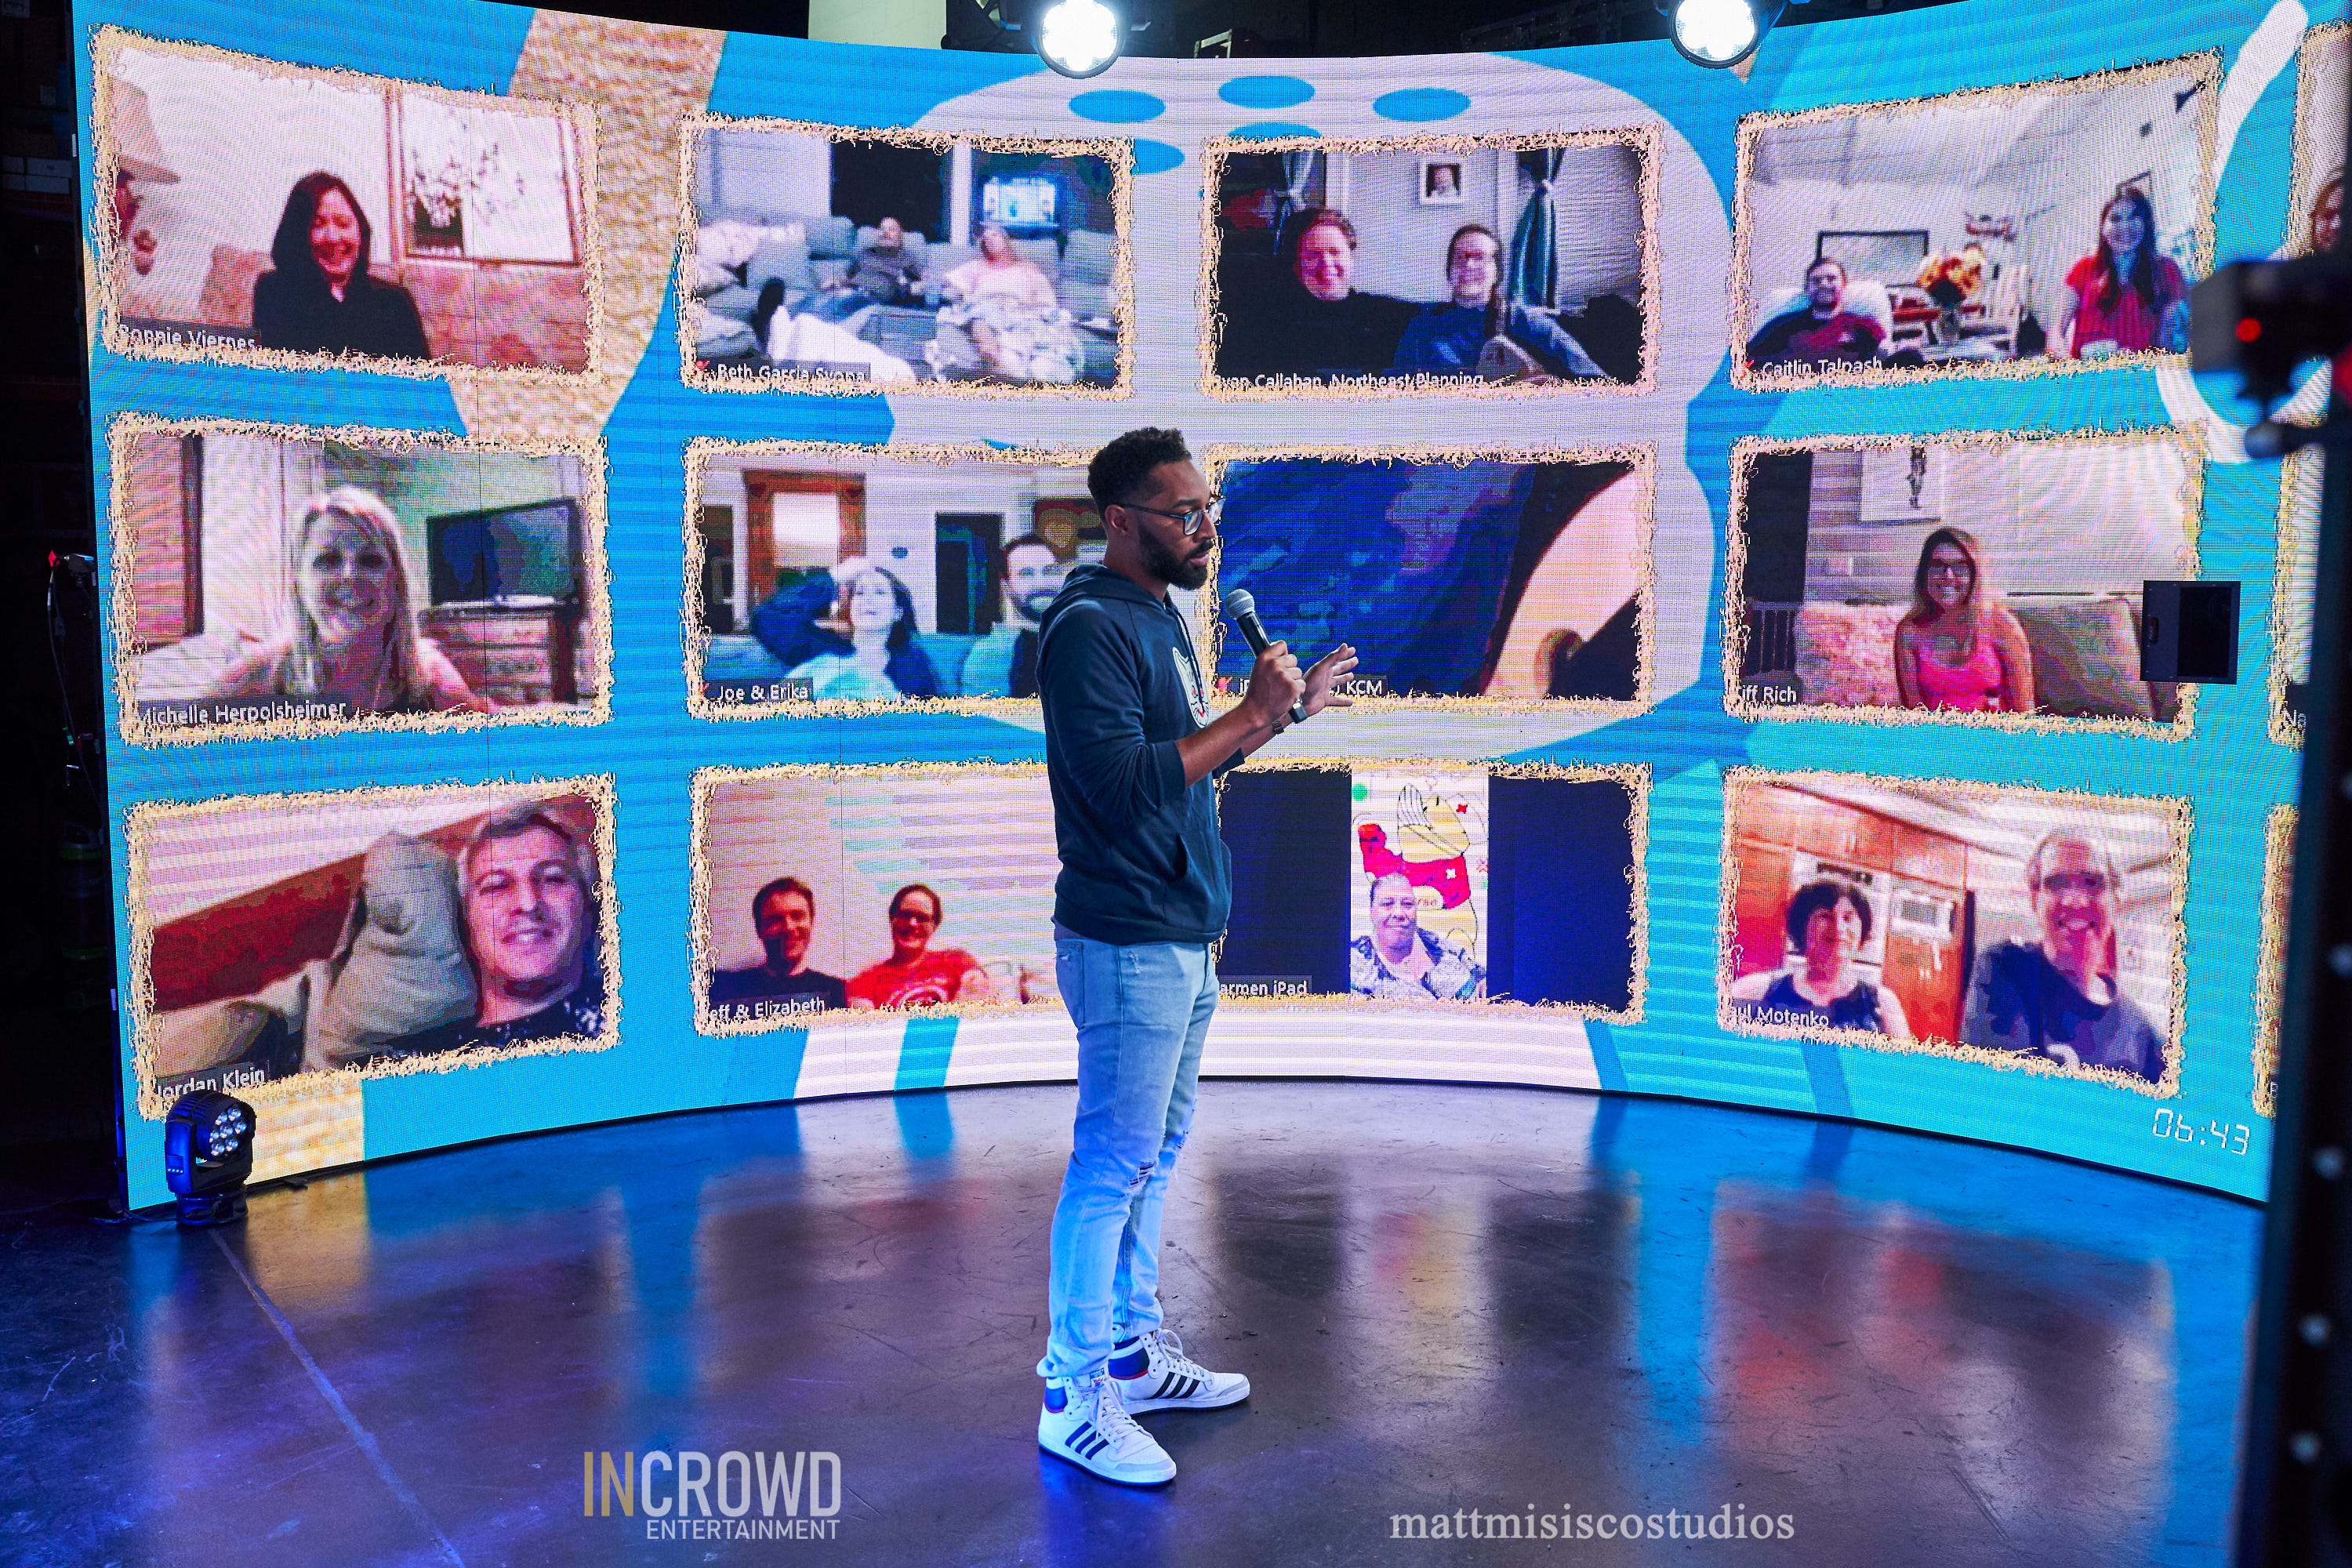 Actor and comedian Tone Bell performs during the Cystic Fibrosis Foundation Comedy Fundraiser on Oct. 16, 2020, from InCrowd's production stage in Los Angeles. Viewers paid to get their Zoom feeds on the giant video wall.